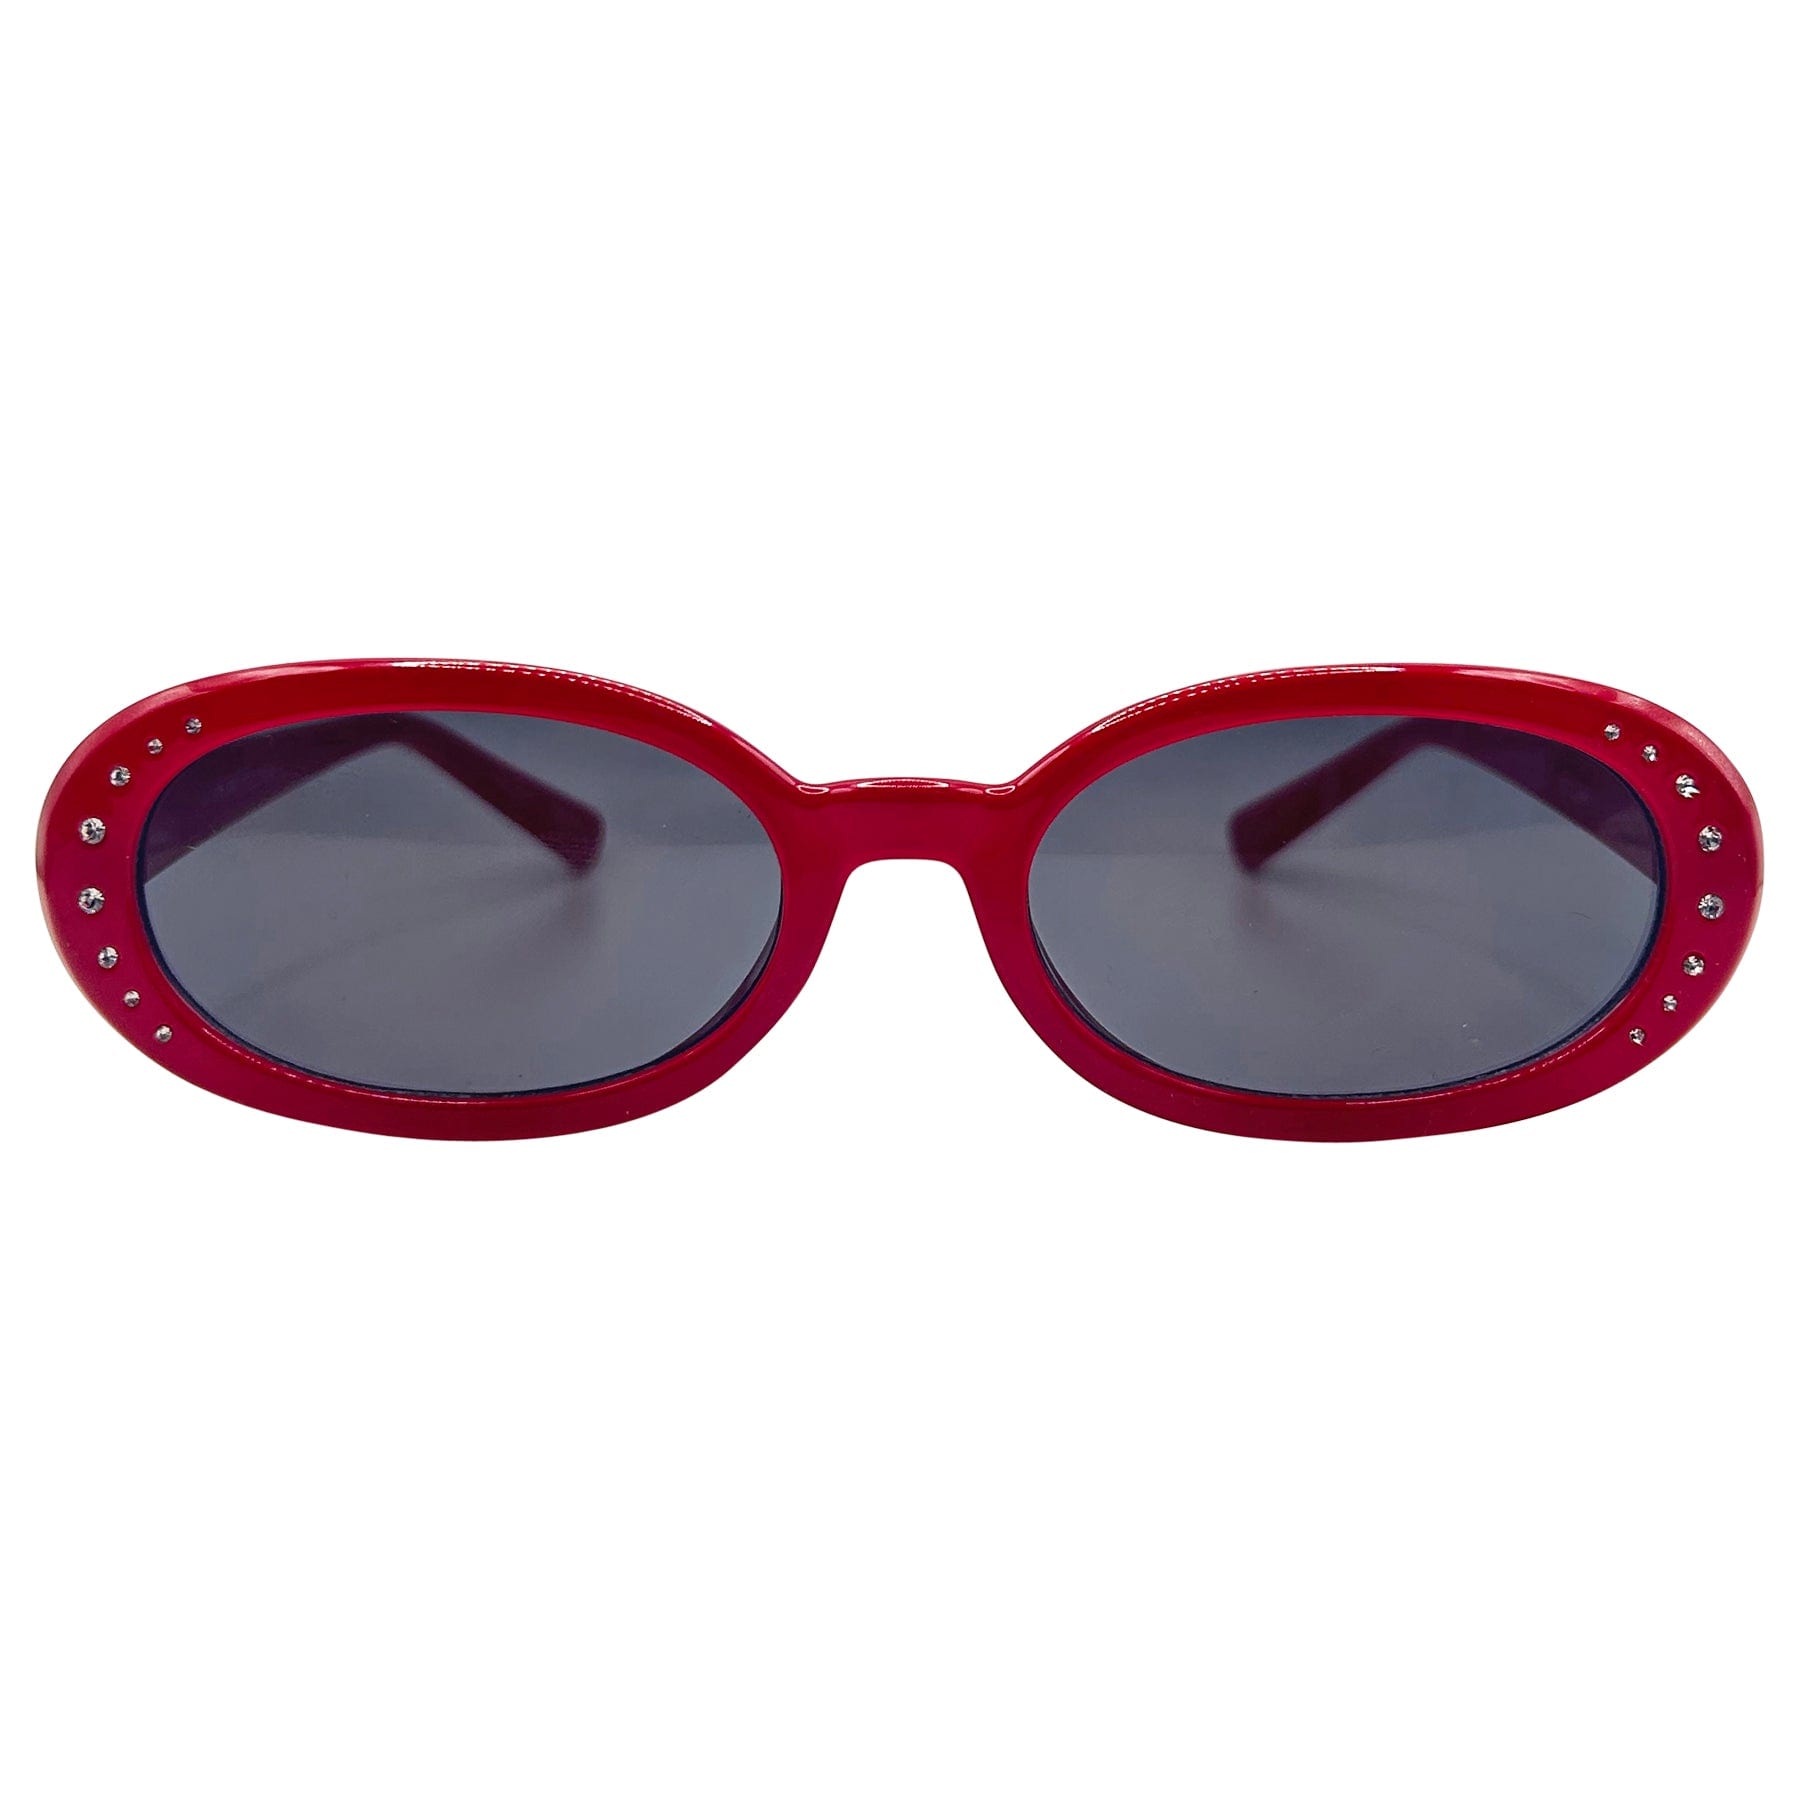 90s style red sunglasses with rhinestones and a rounded oval shape 